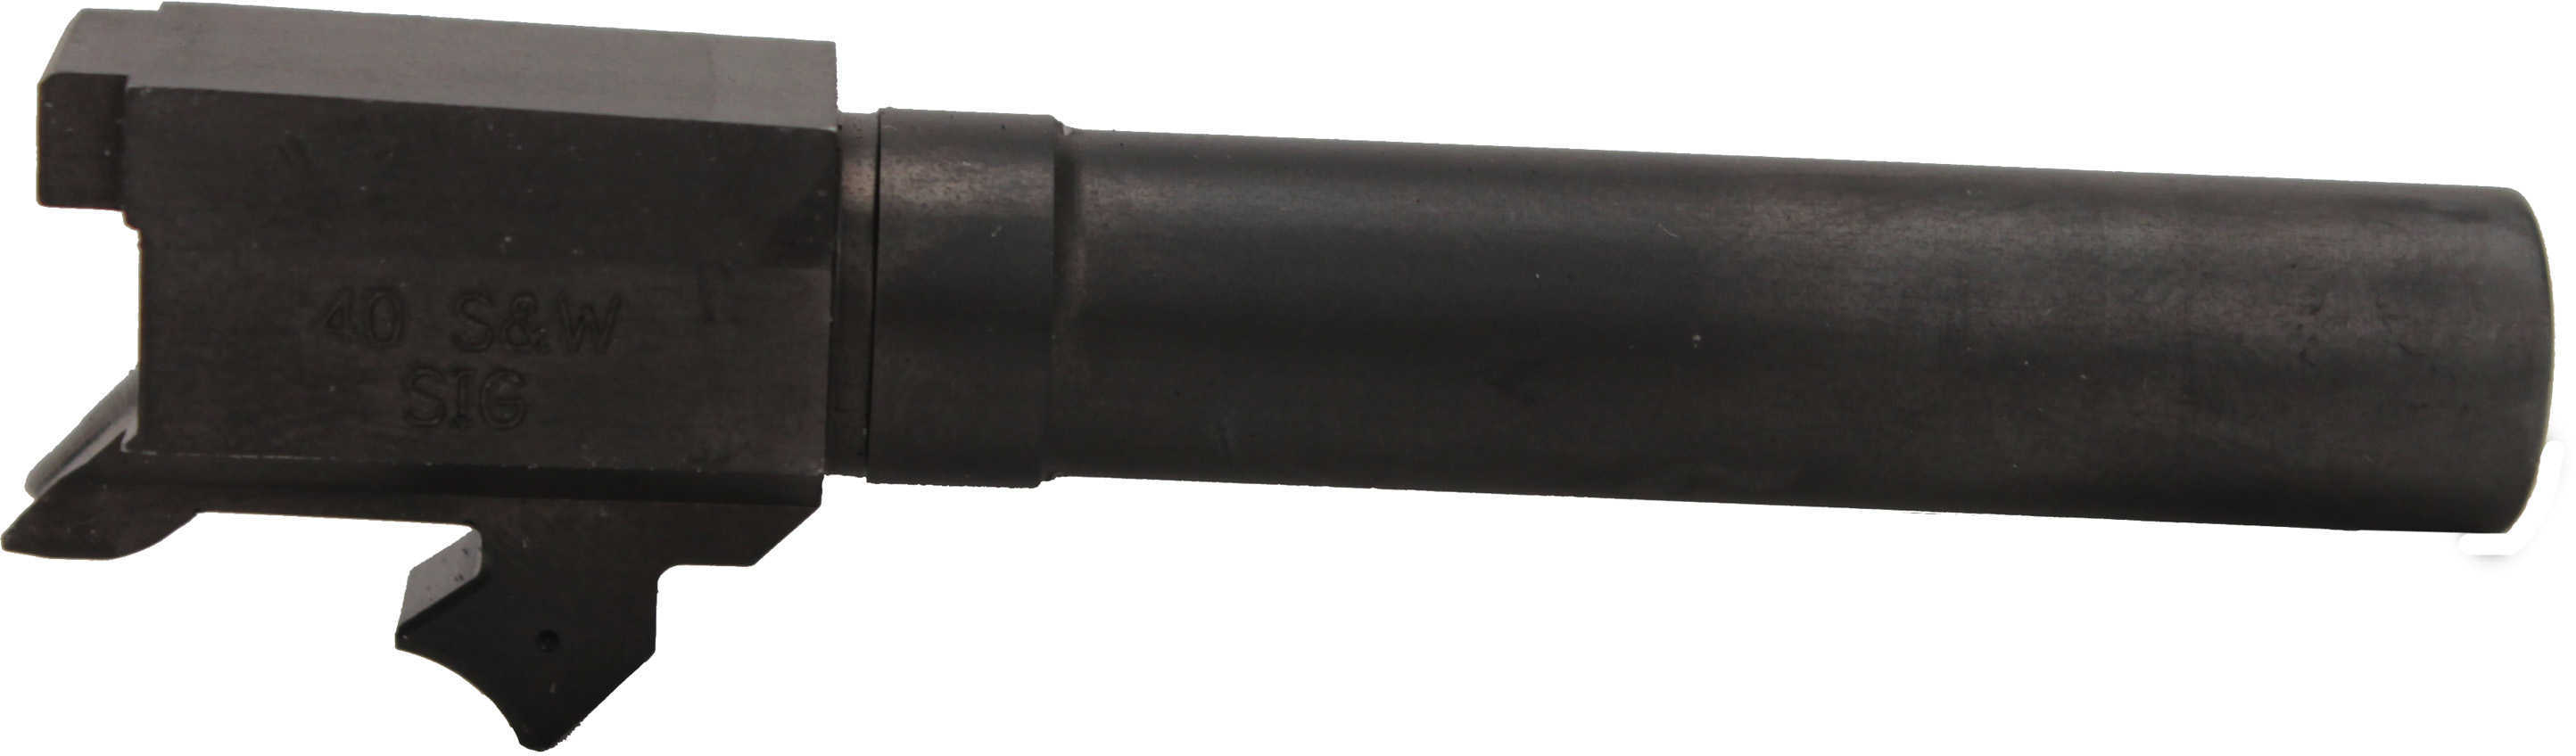 Sig Sauer Conversion Barrel For P229 40 Smith & Wesson 3.9 Inch Md: 34224637